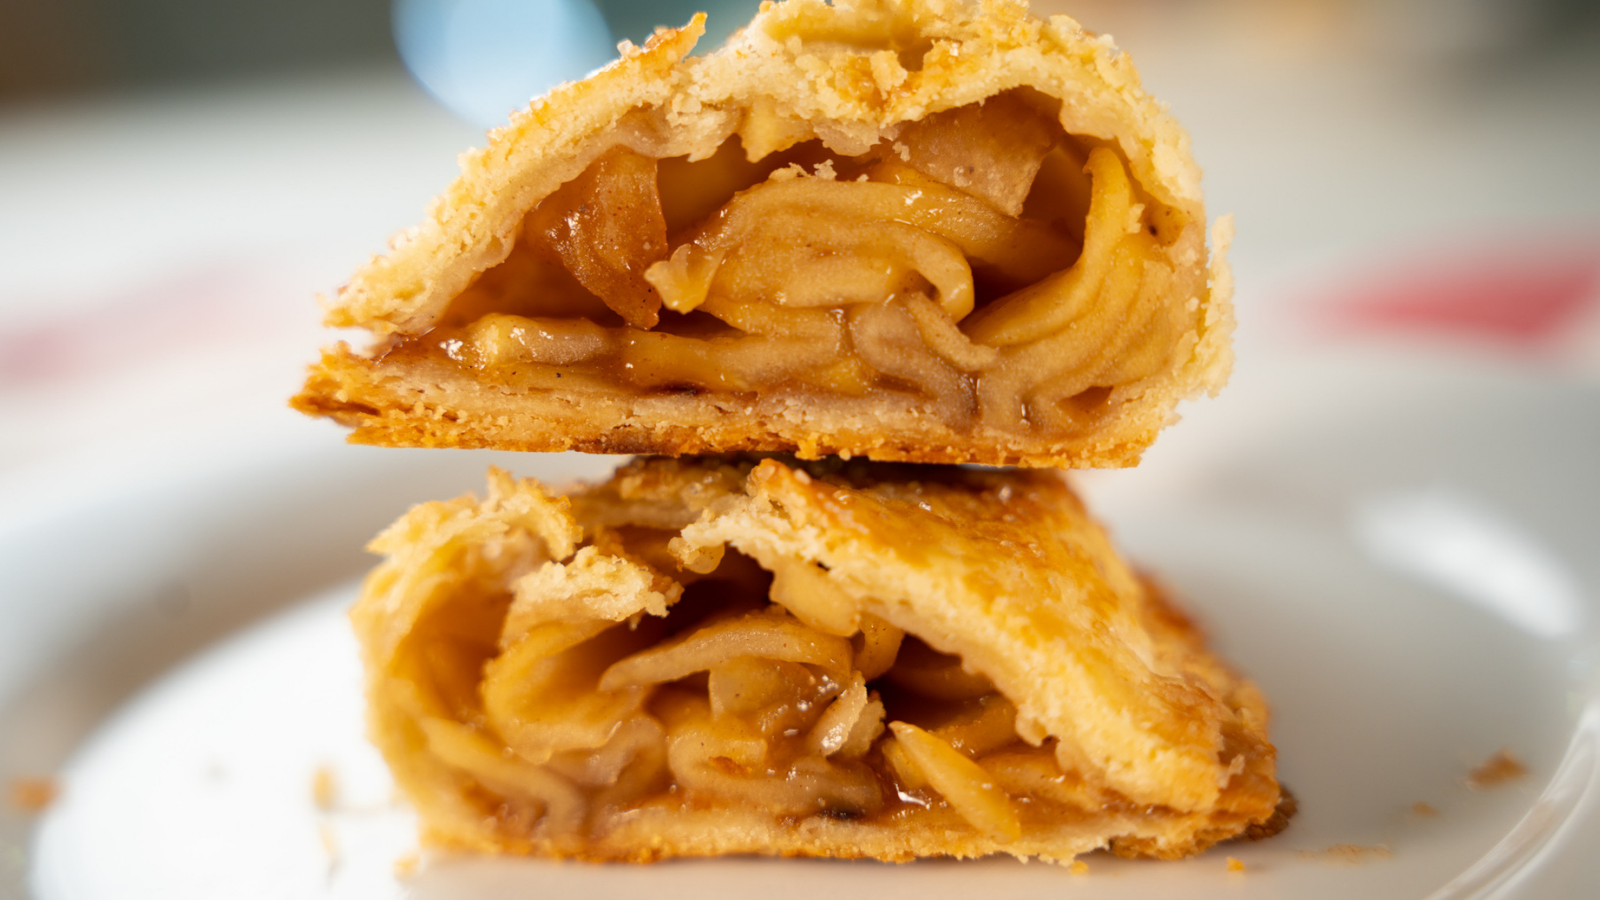 We’ve Got to Hand It to You: For National Apple Pie Day,  Coast Packing Says: Try Chef Greg’s Recipe for Apple Hand Pies